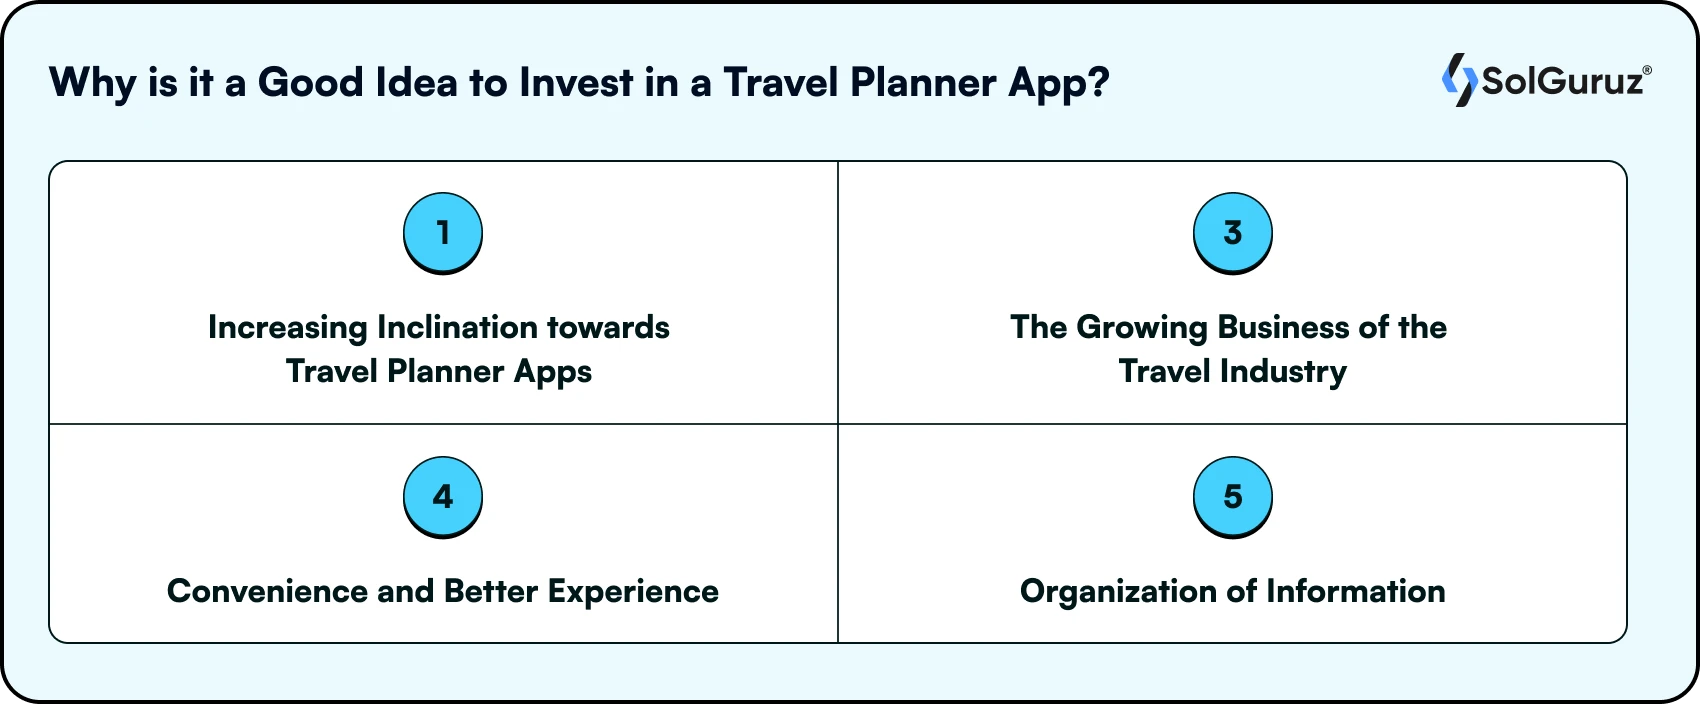 Why is it a Good Idea to Invest in a Travel Planner App?